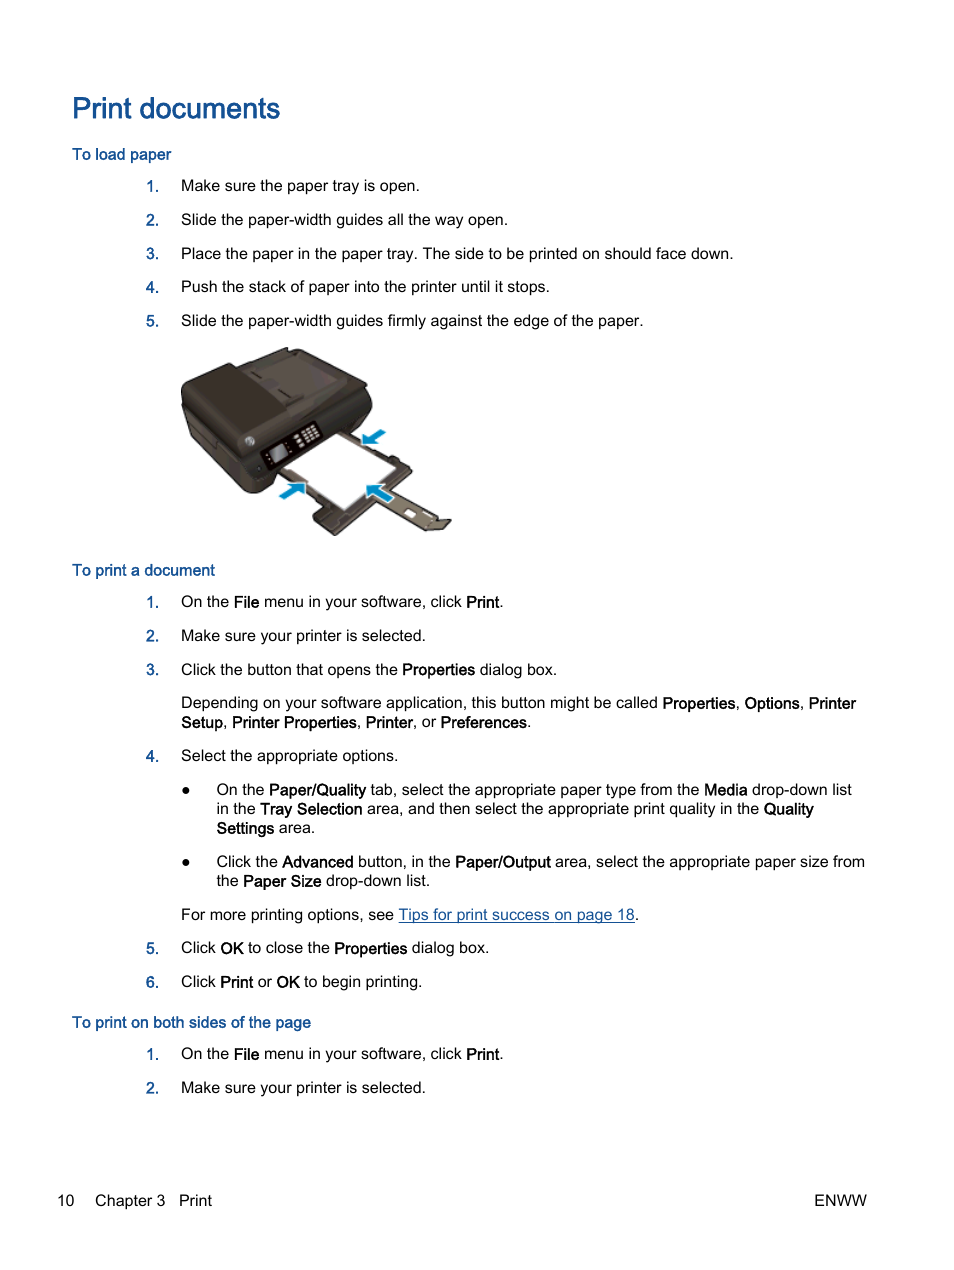 Print documents | HP Officejet 4630 e-All-in-One Printer User Manual | Page  16 / 166 | Original mode